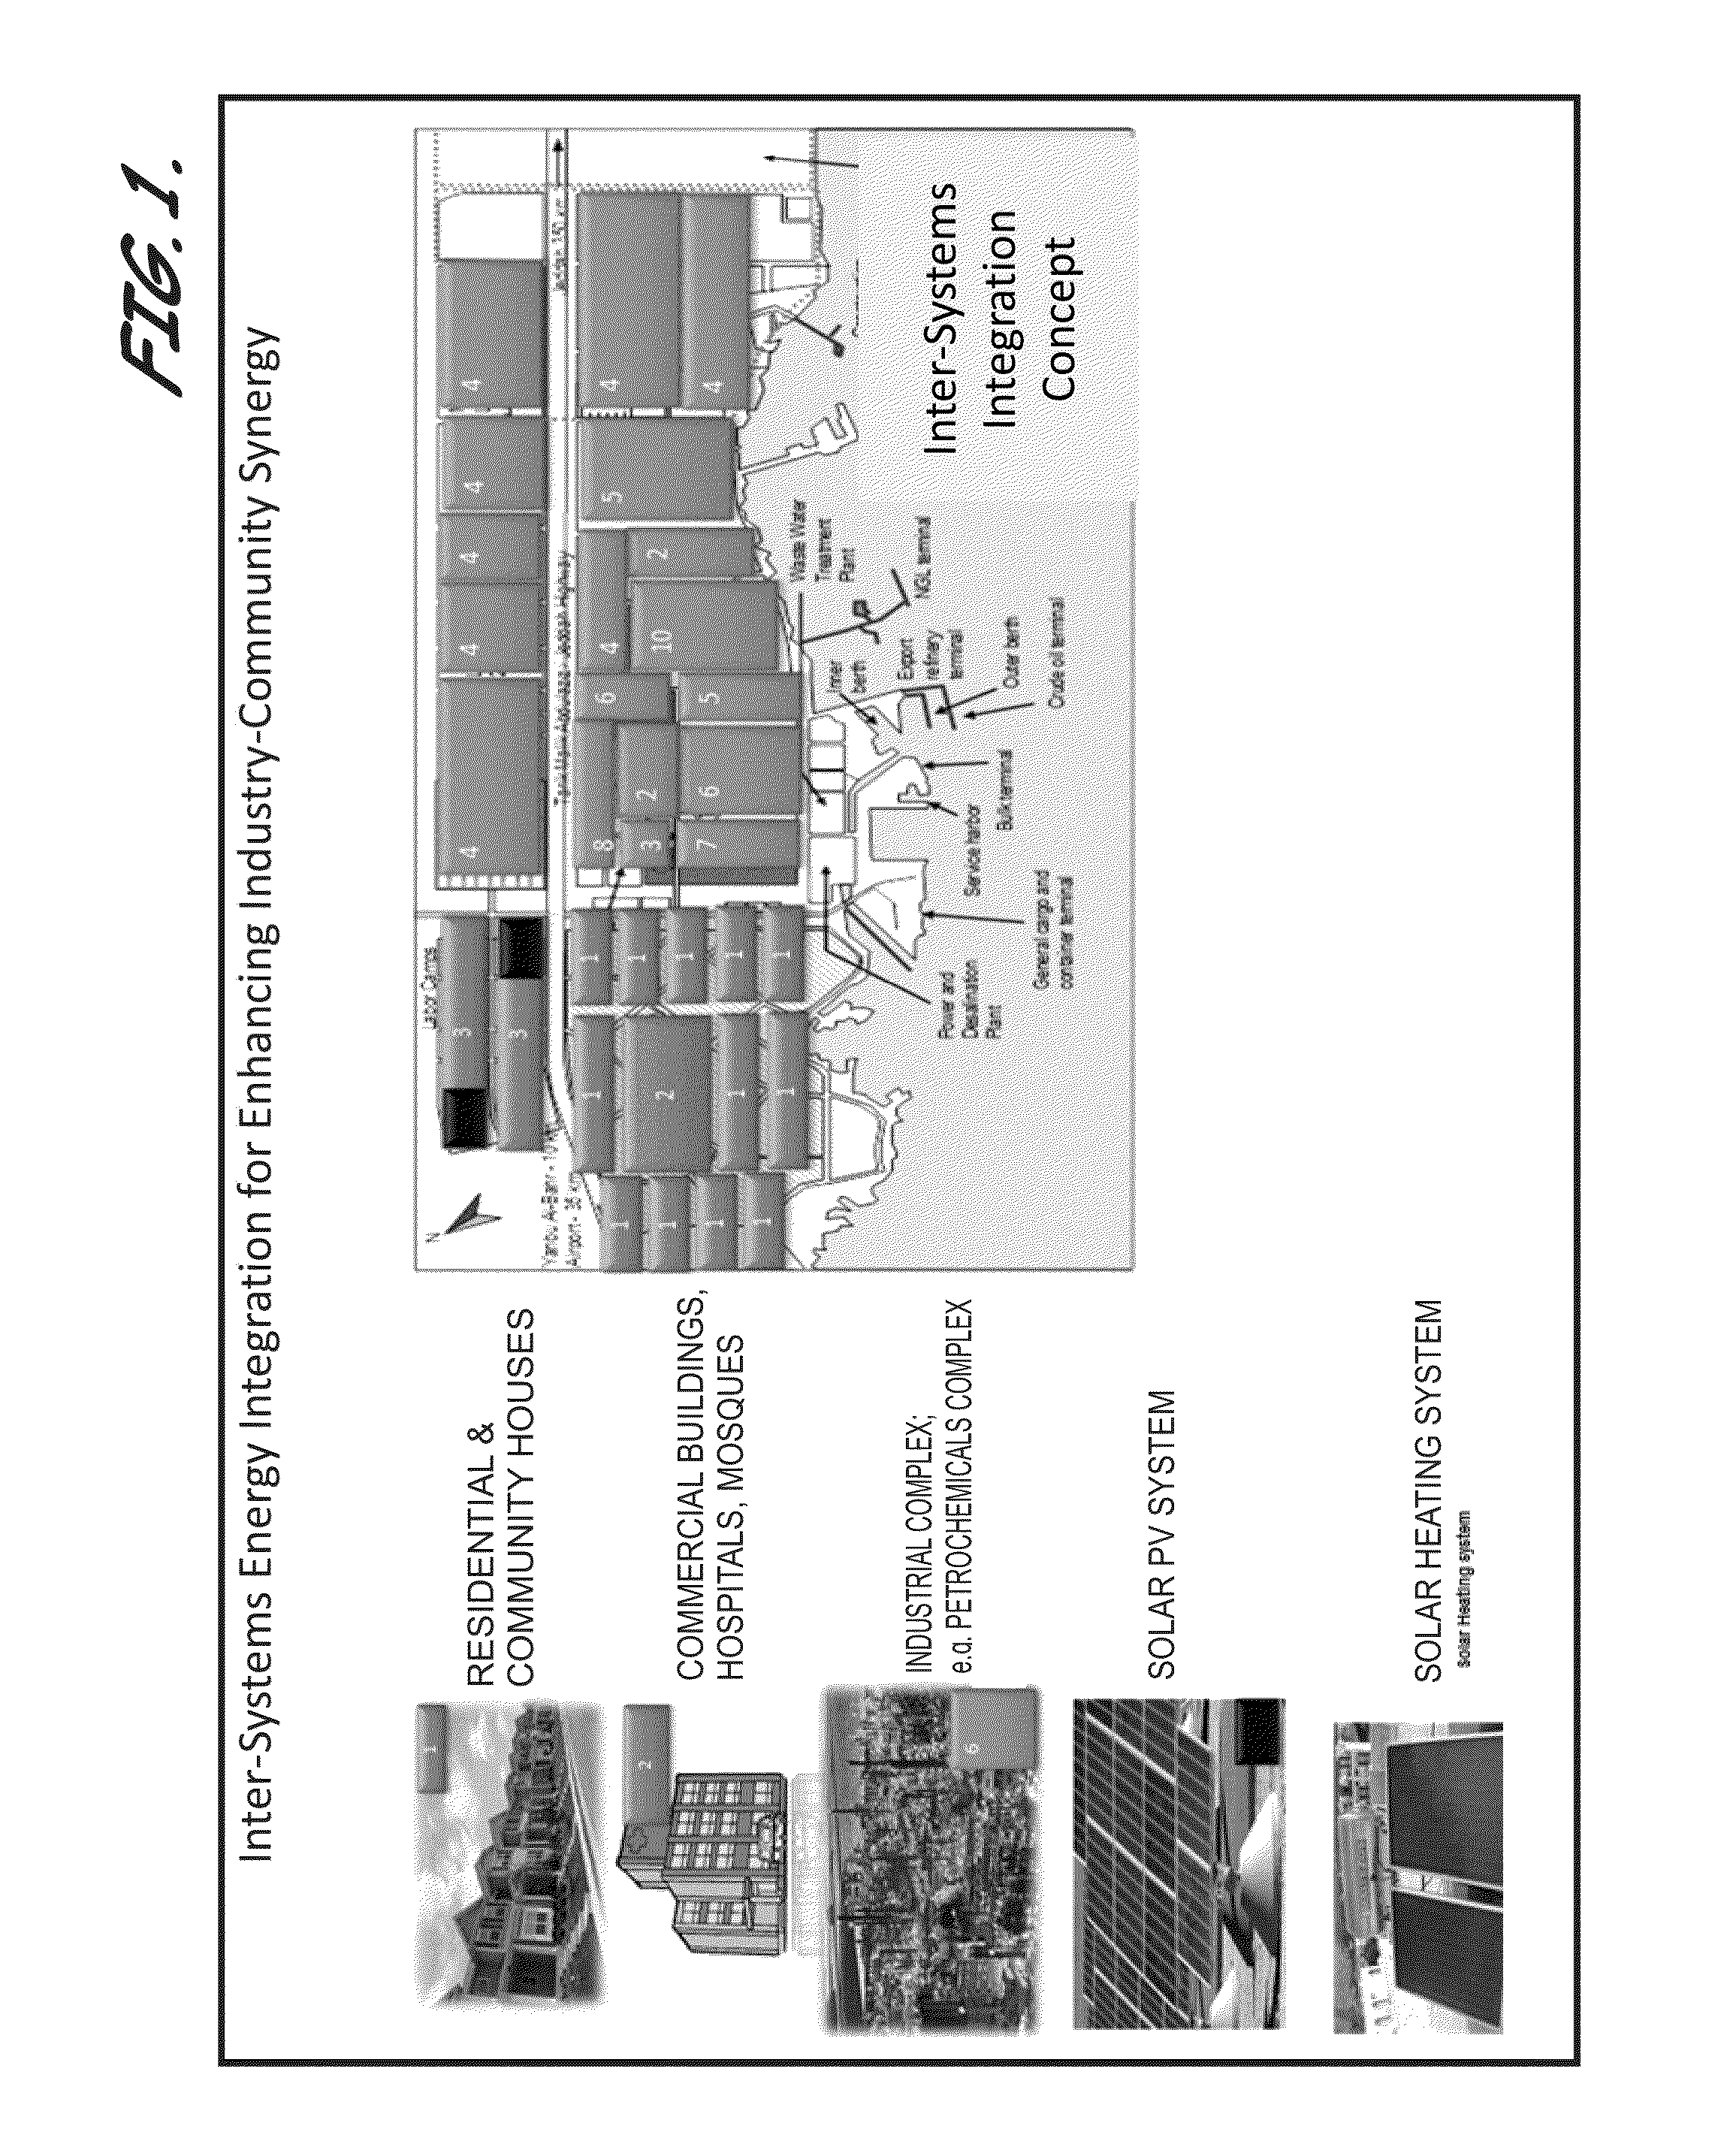 Methods For Enhanced Energy Efficiency Via Systematic Hybrid Inter-Processes Integration